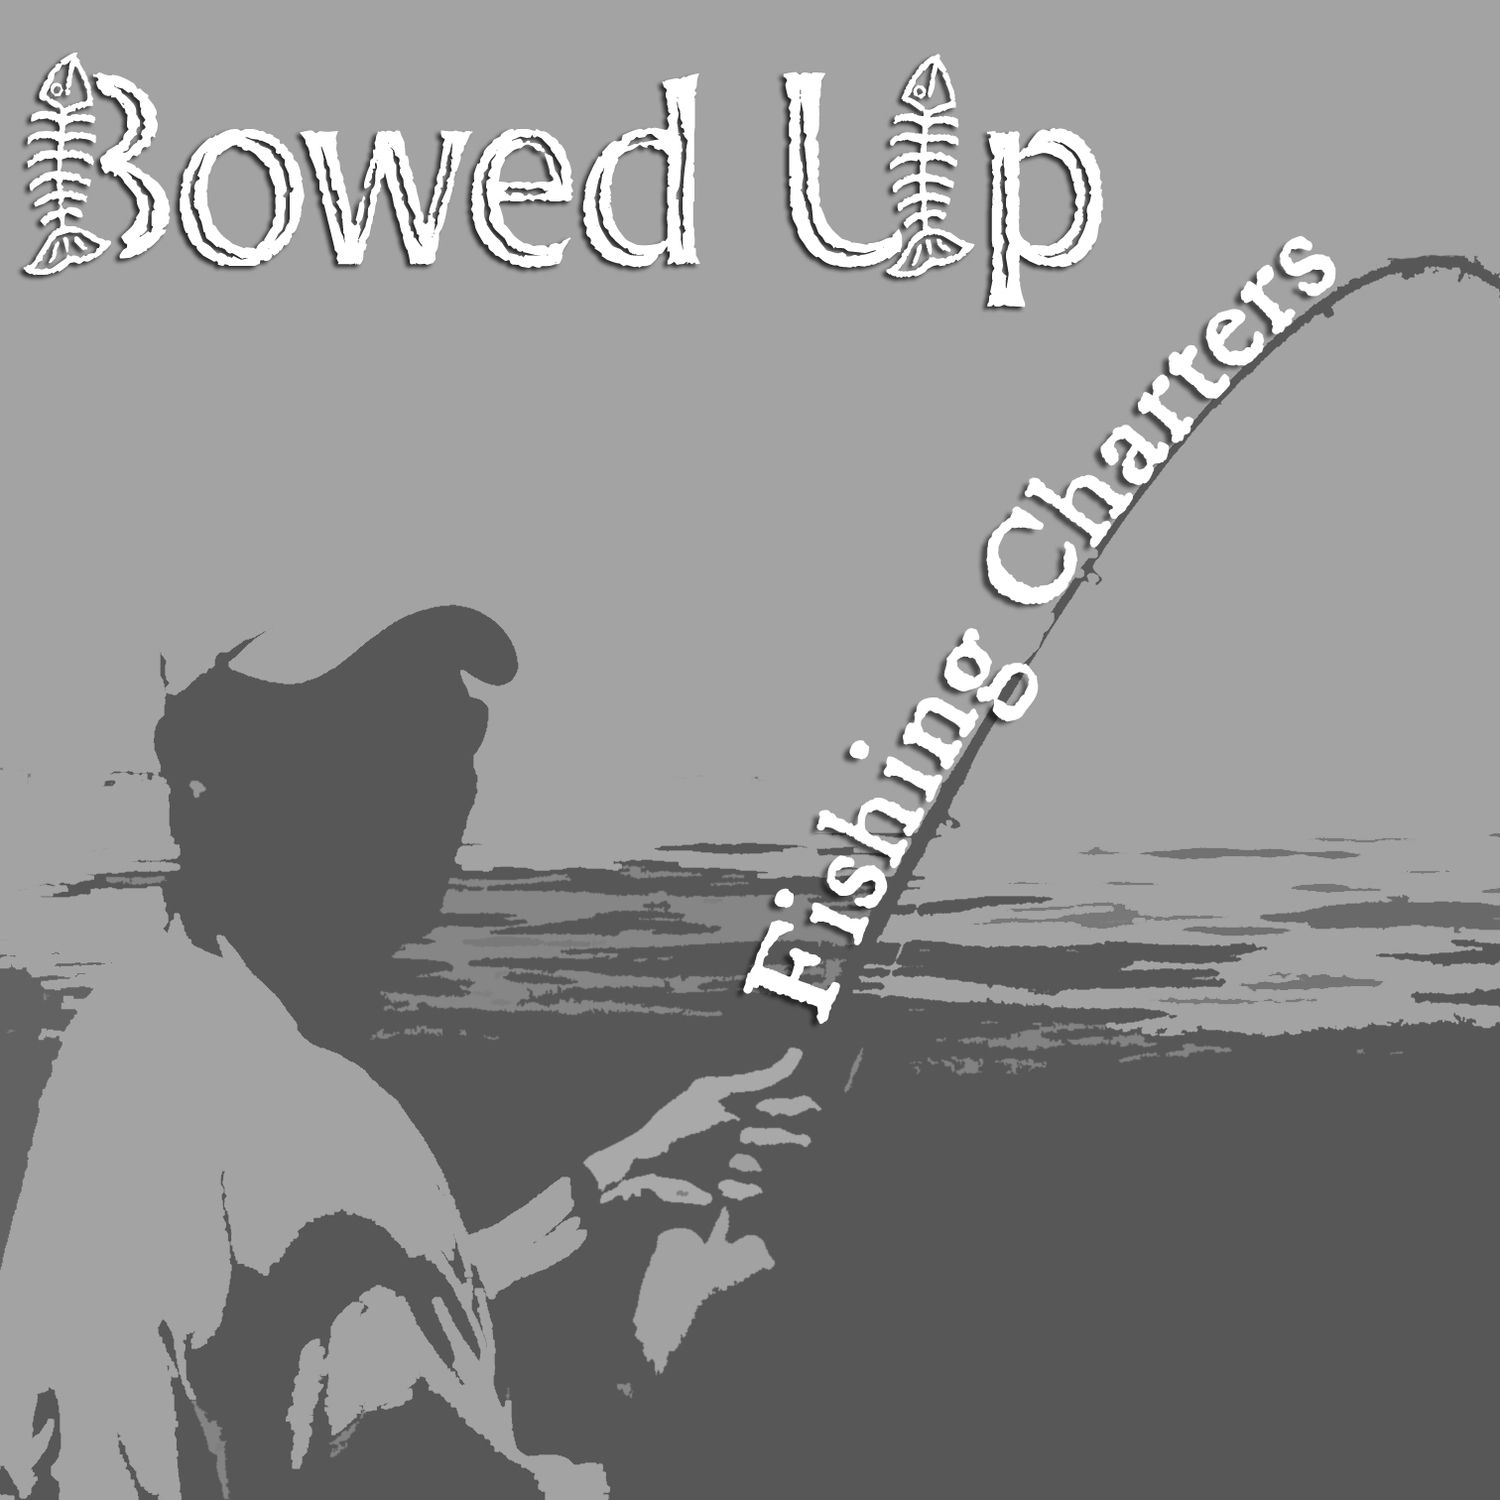 Bowed Up Fishing Charters